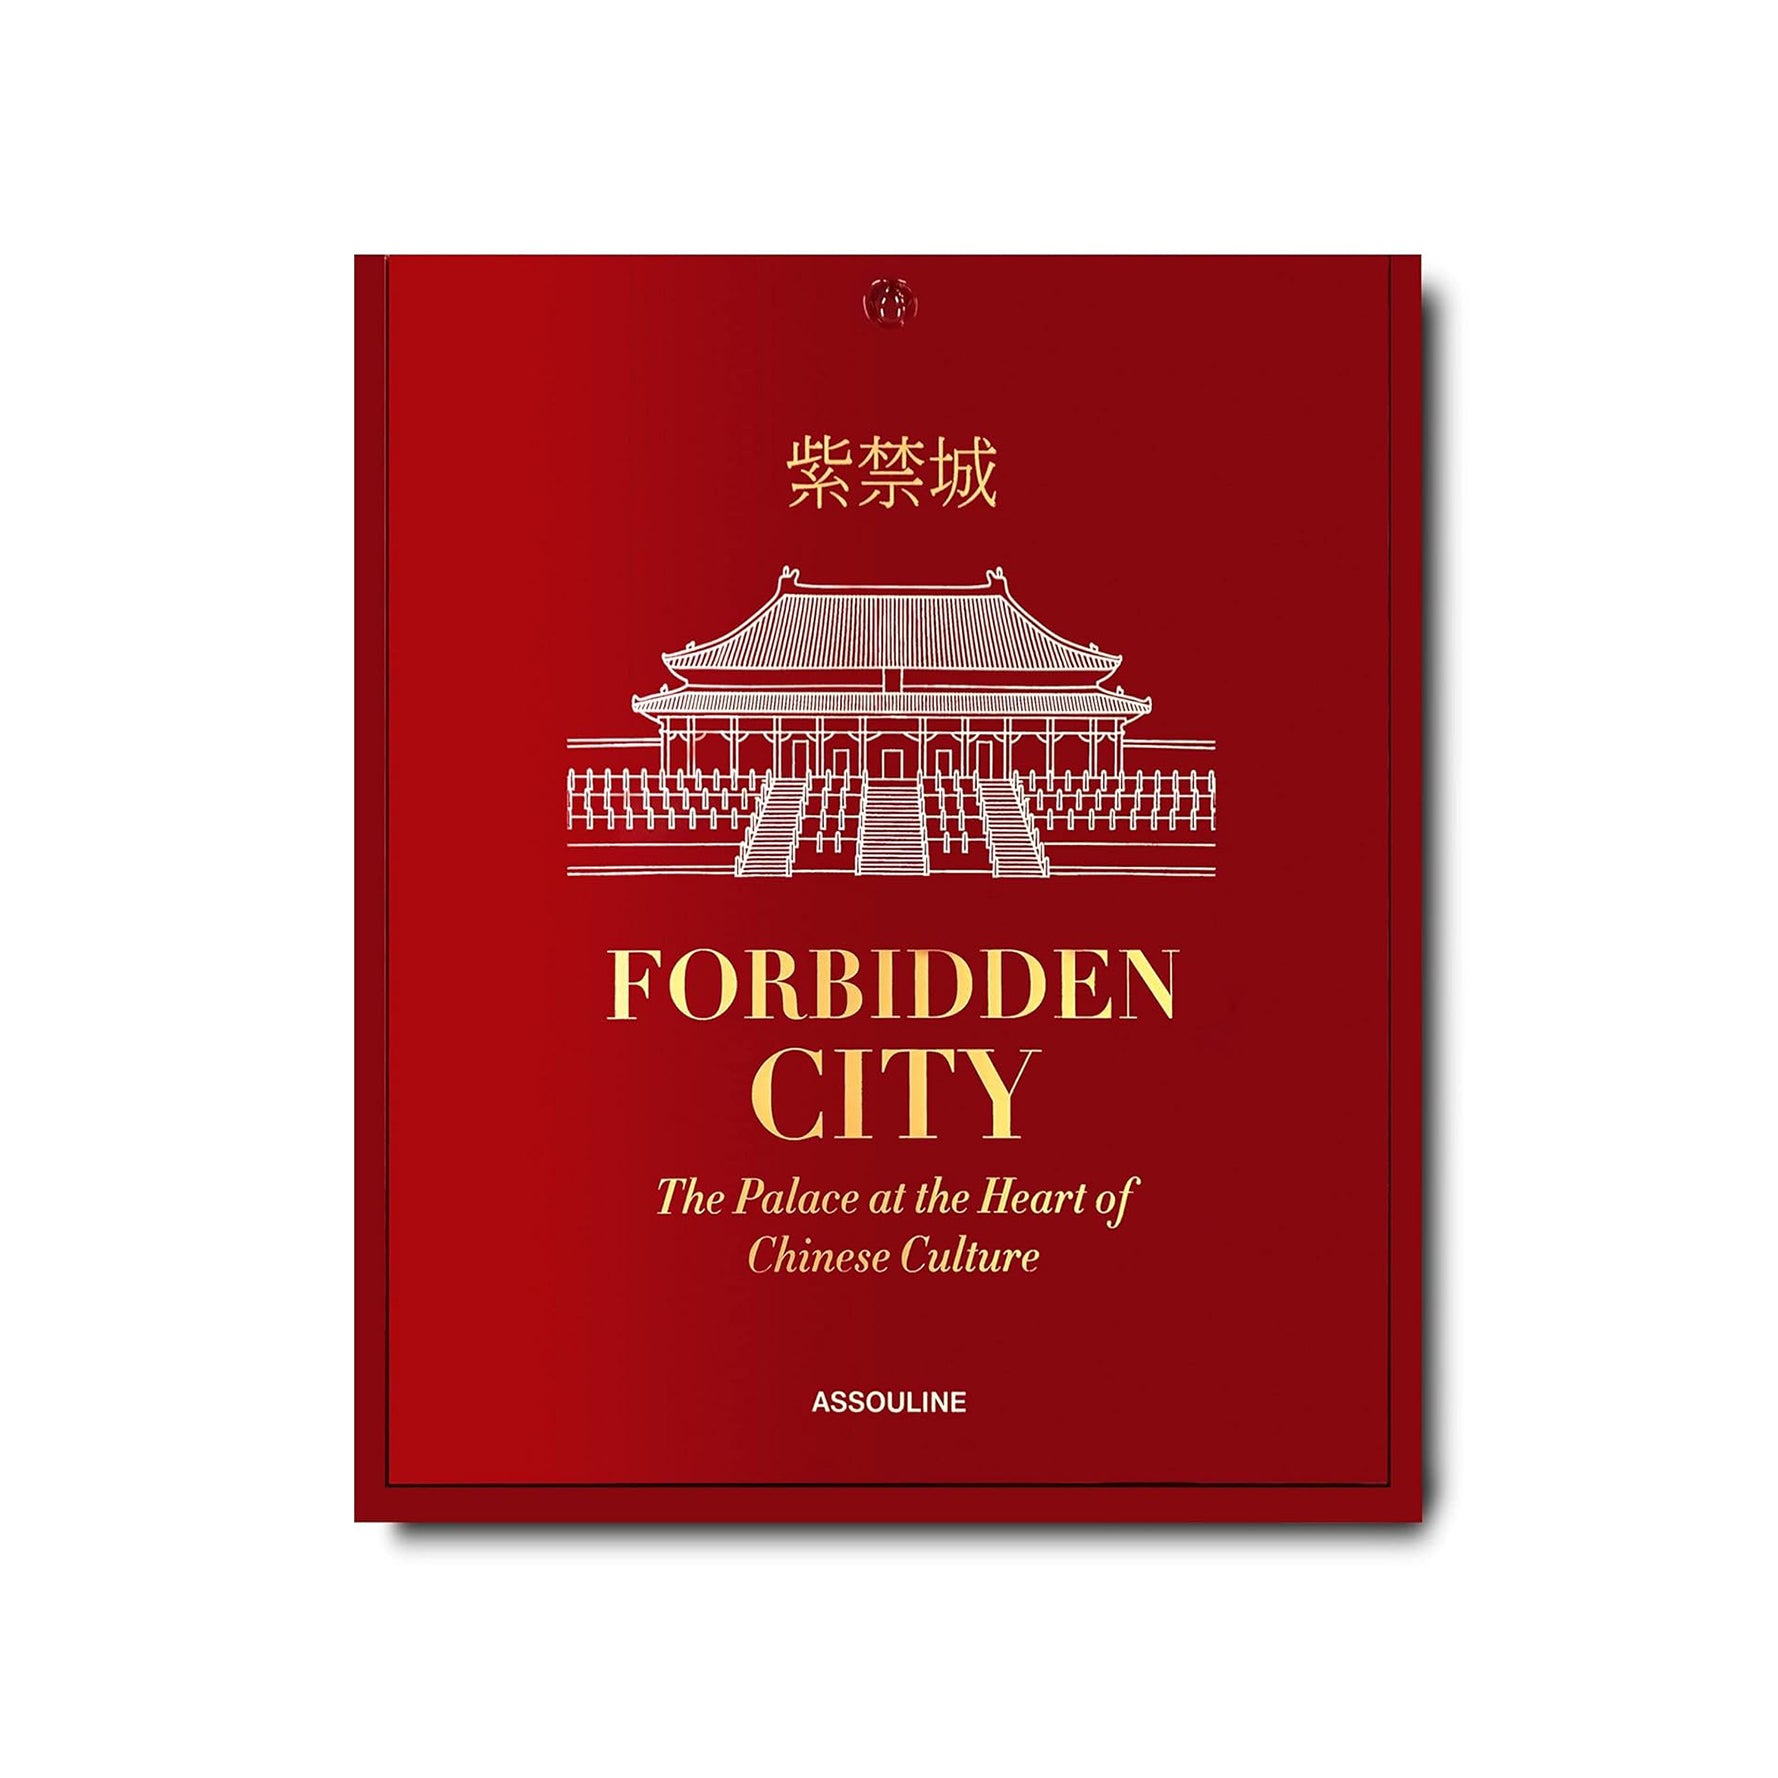 Forbidden City: The Palace at the Heart of Chinese Culture by Assouline